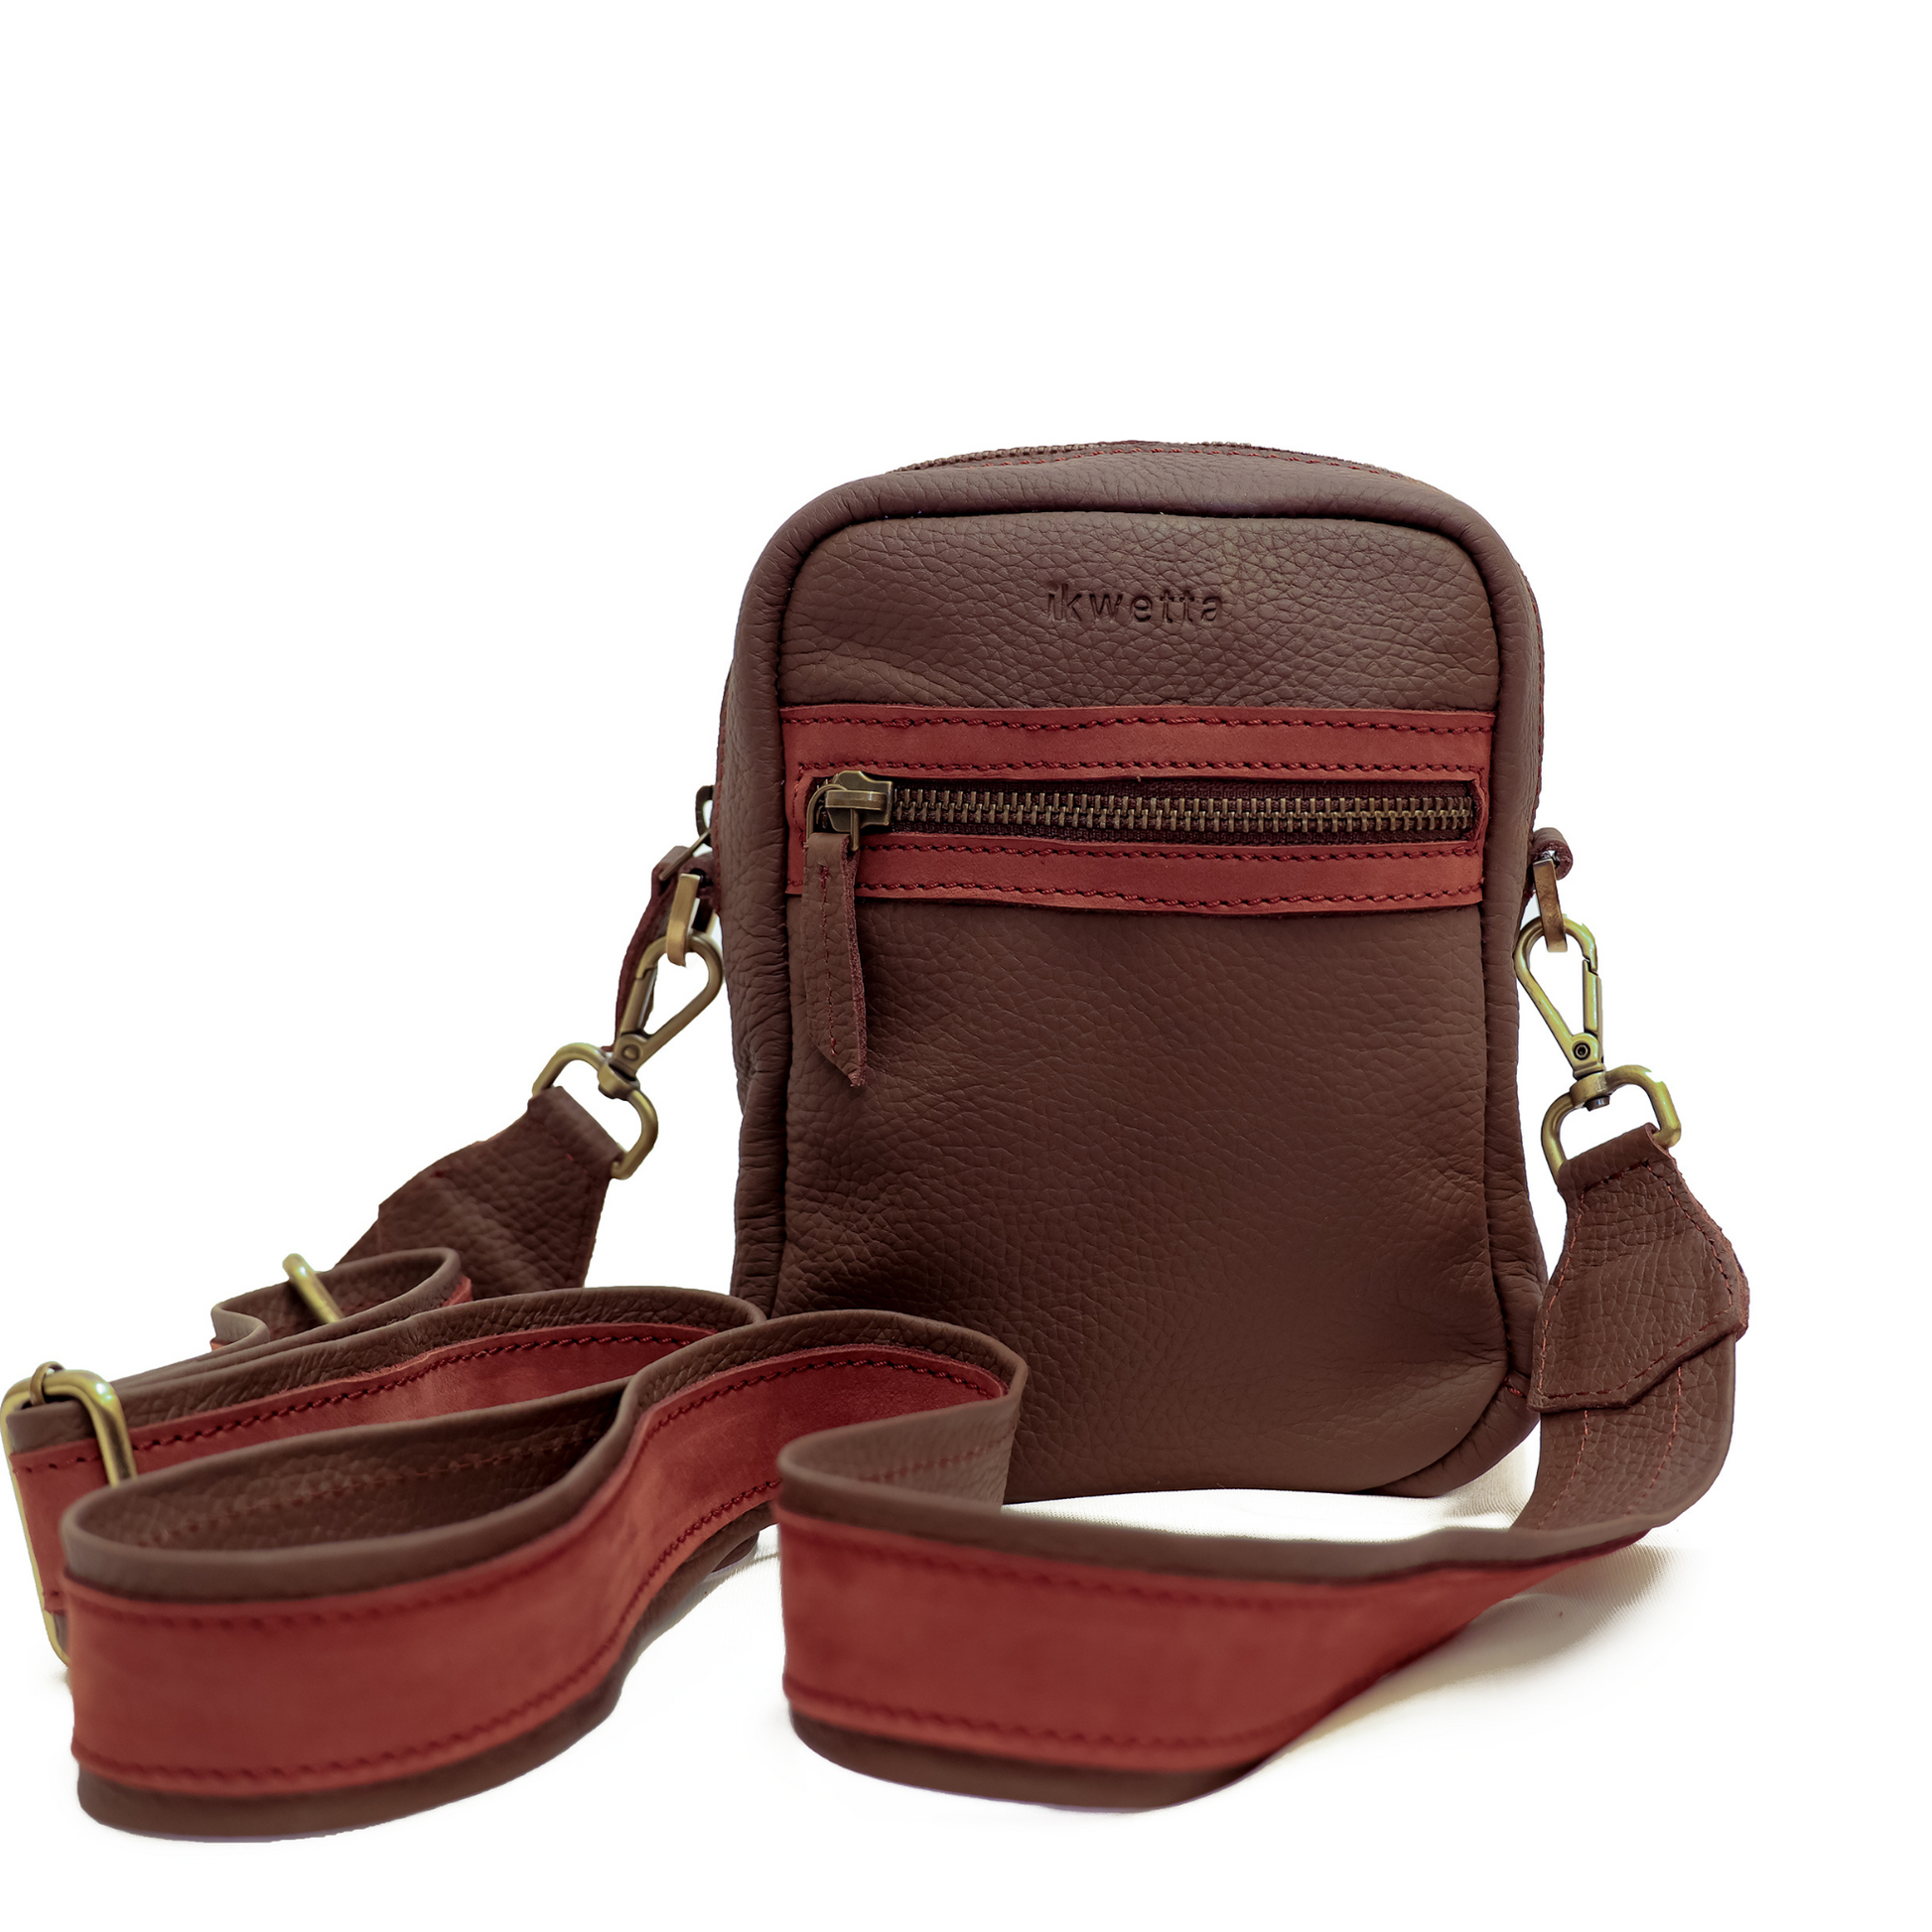 Men's crossbody bag in Rocky road milled leather and hunting suede with adjustable crossbody strap